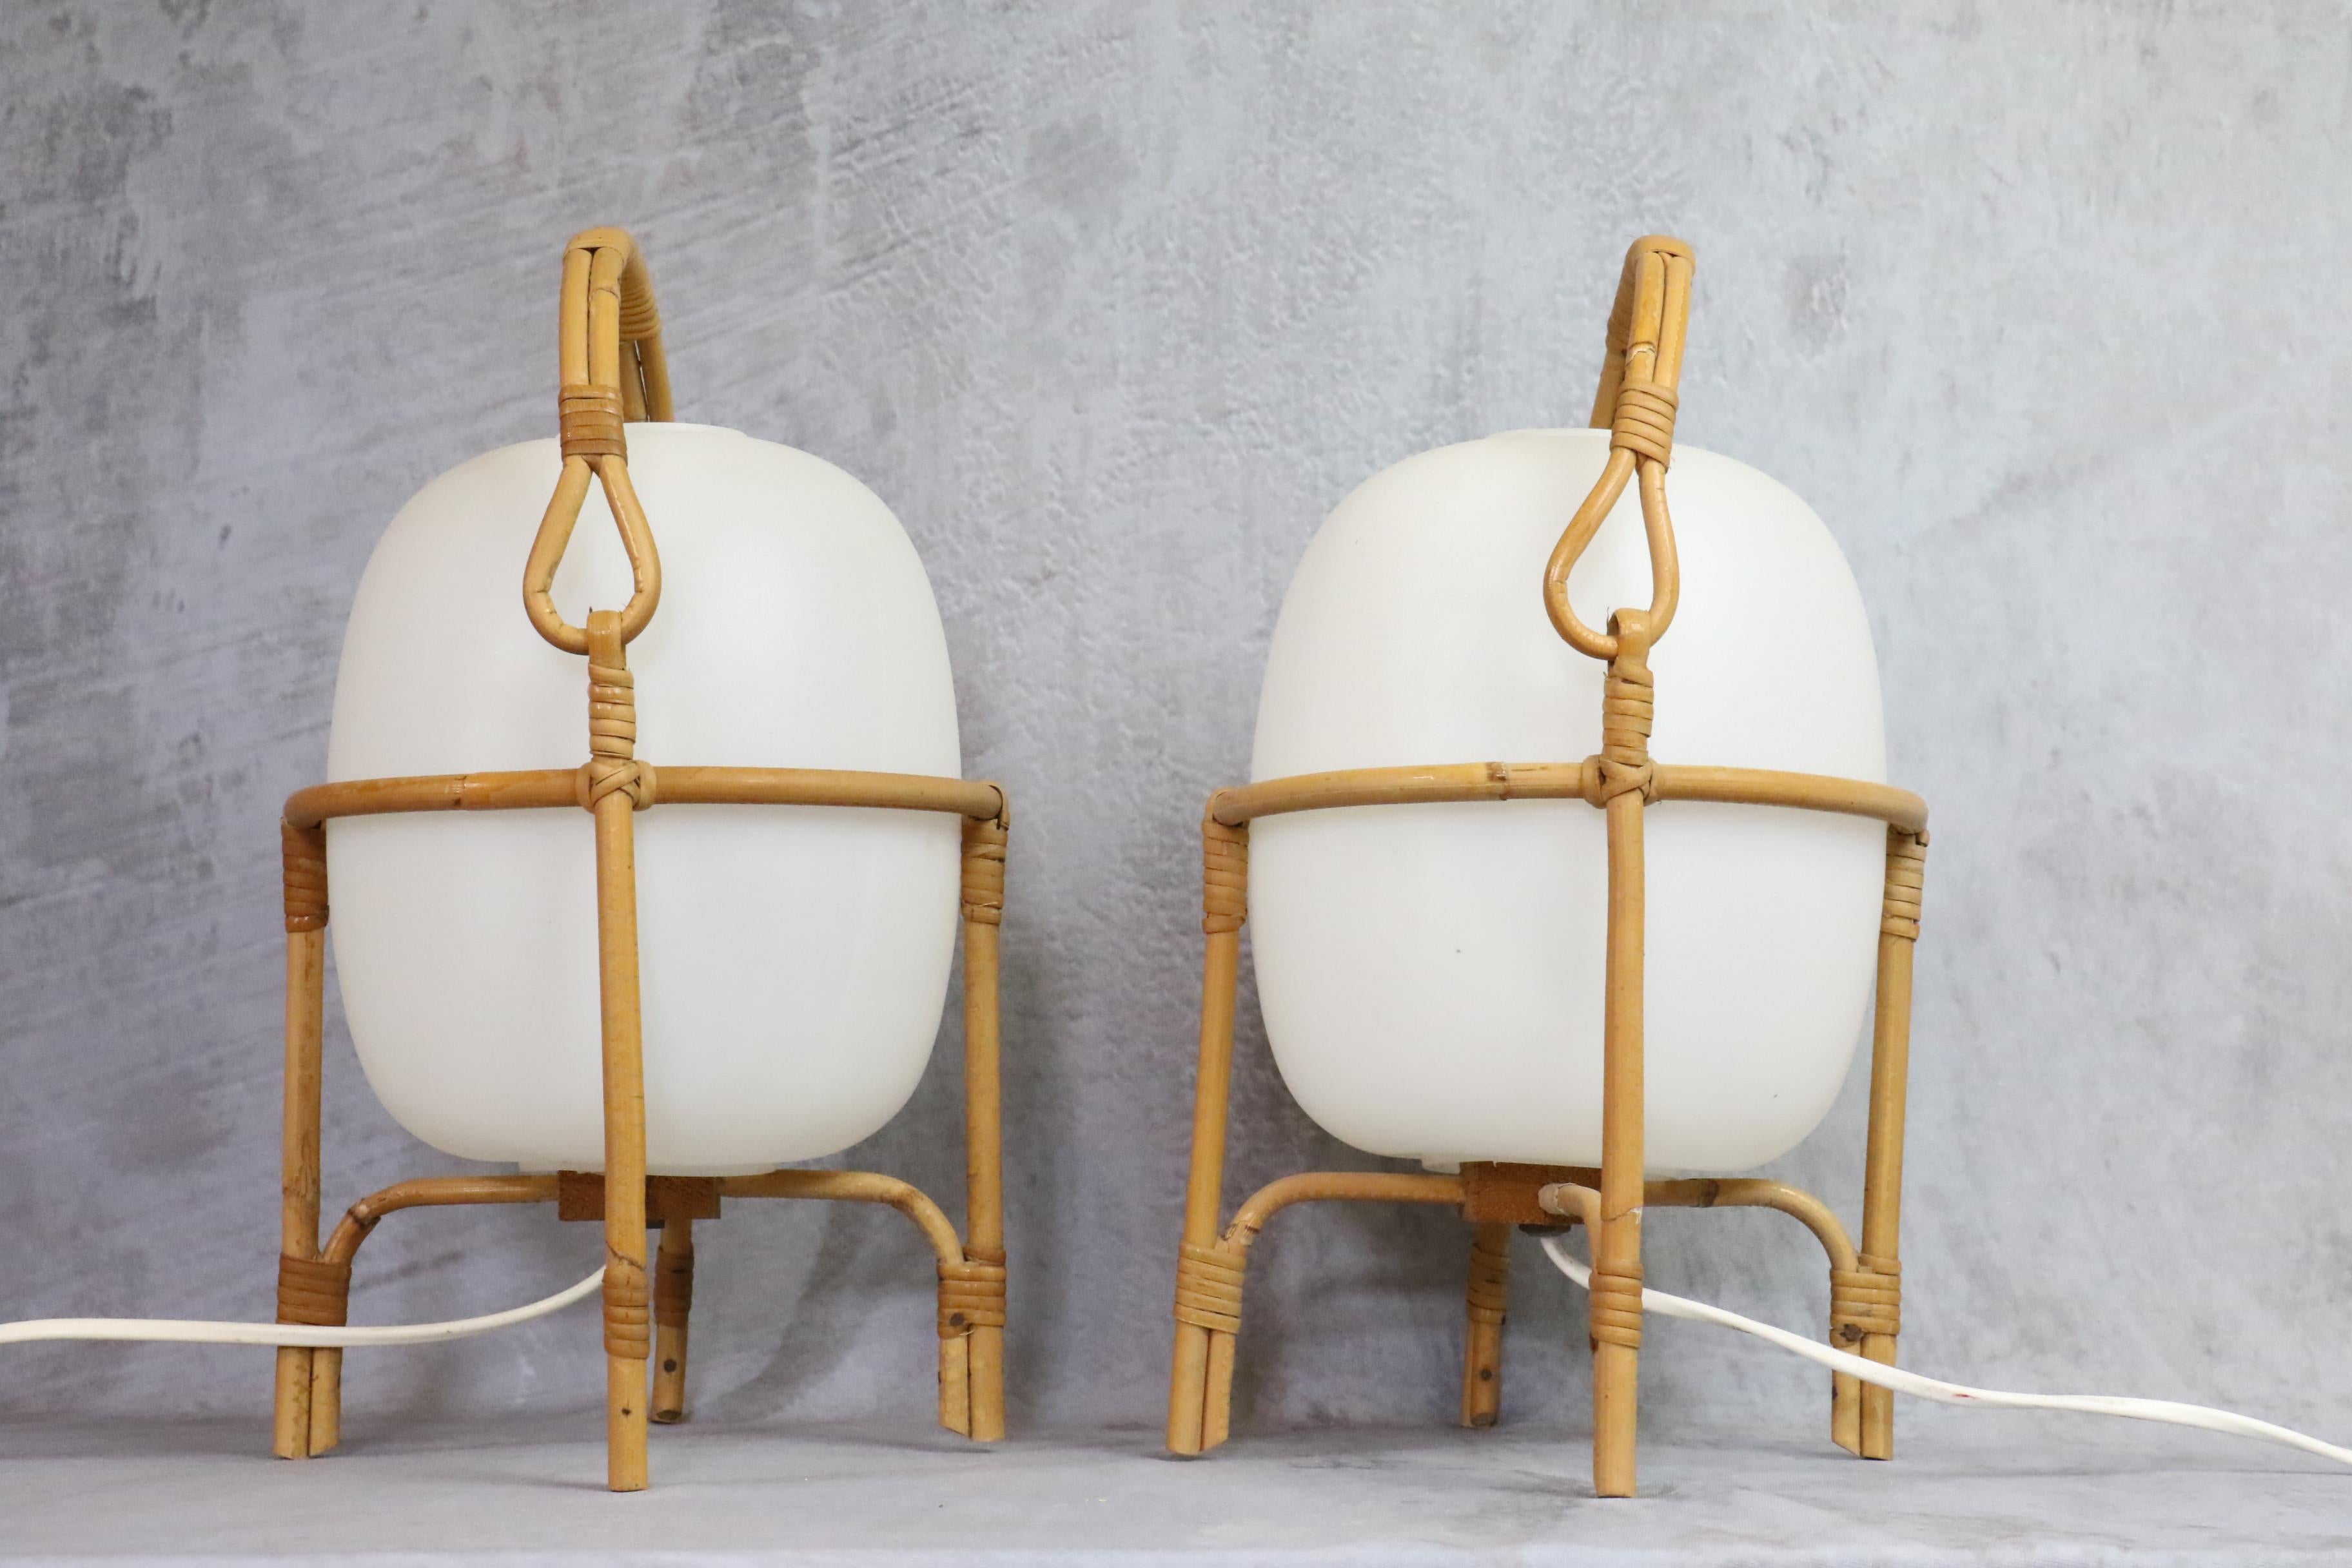 Rare pair of Cestita lamps by Miguel Mila for Tramo, 1960s

Published by Tramo in the 60's, this is a superb and rare pair of Cestita lamps, from the first edition. This model brings a soft and warm light and a decorative touch all in elegance and